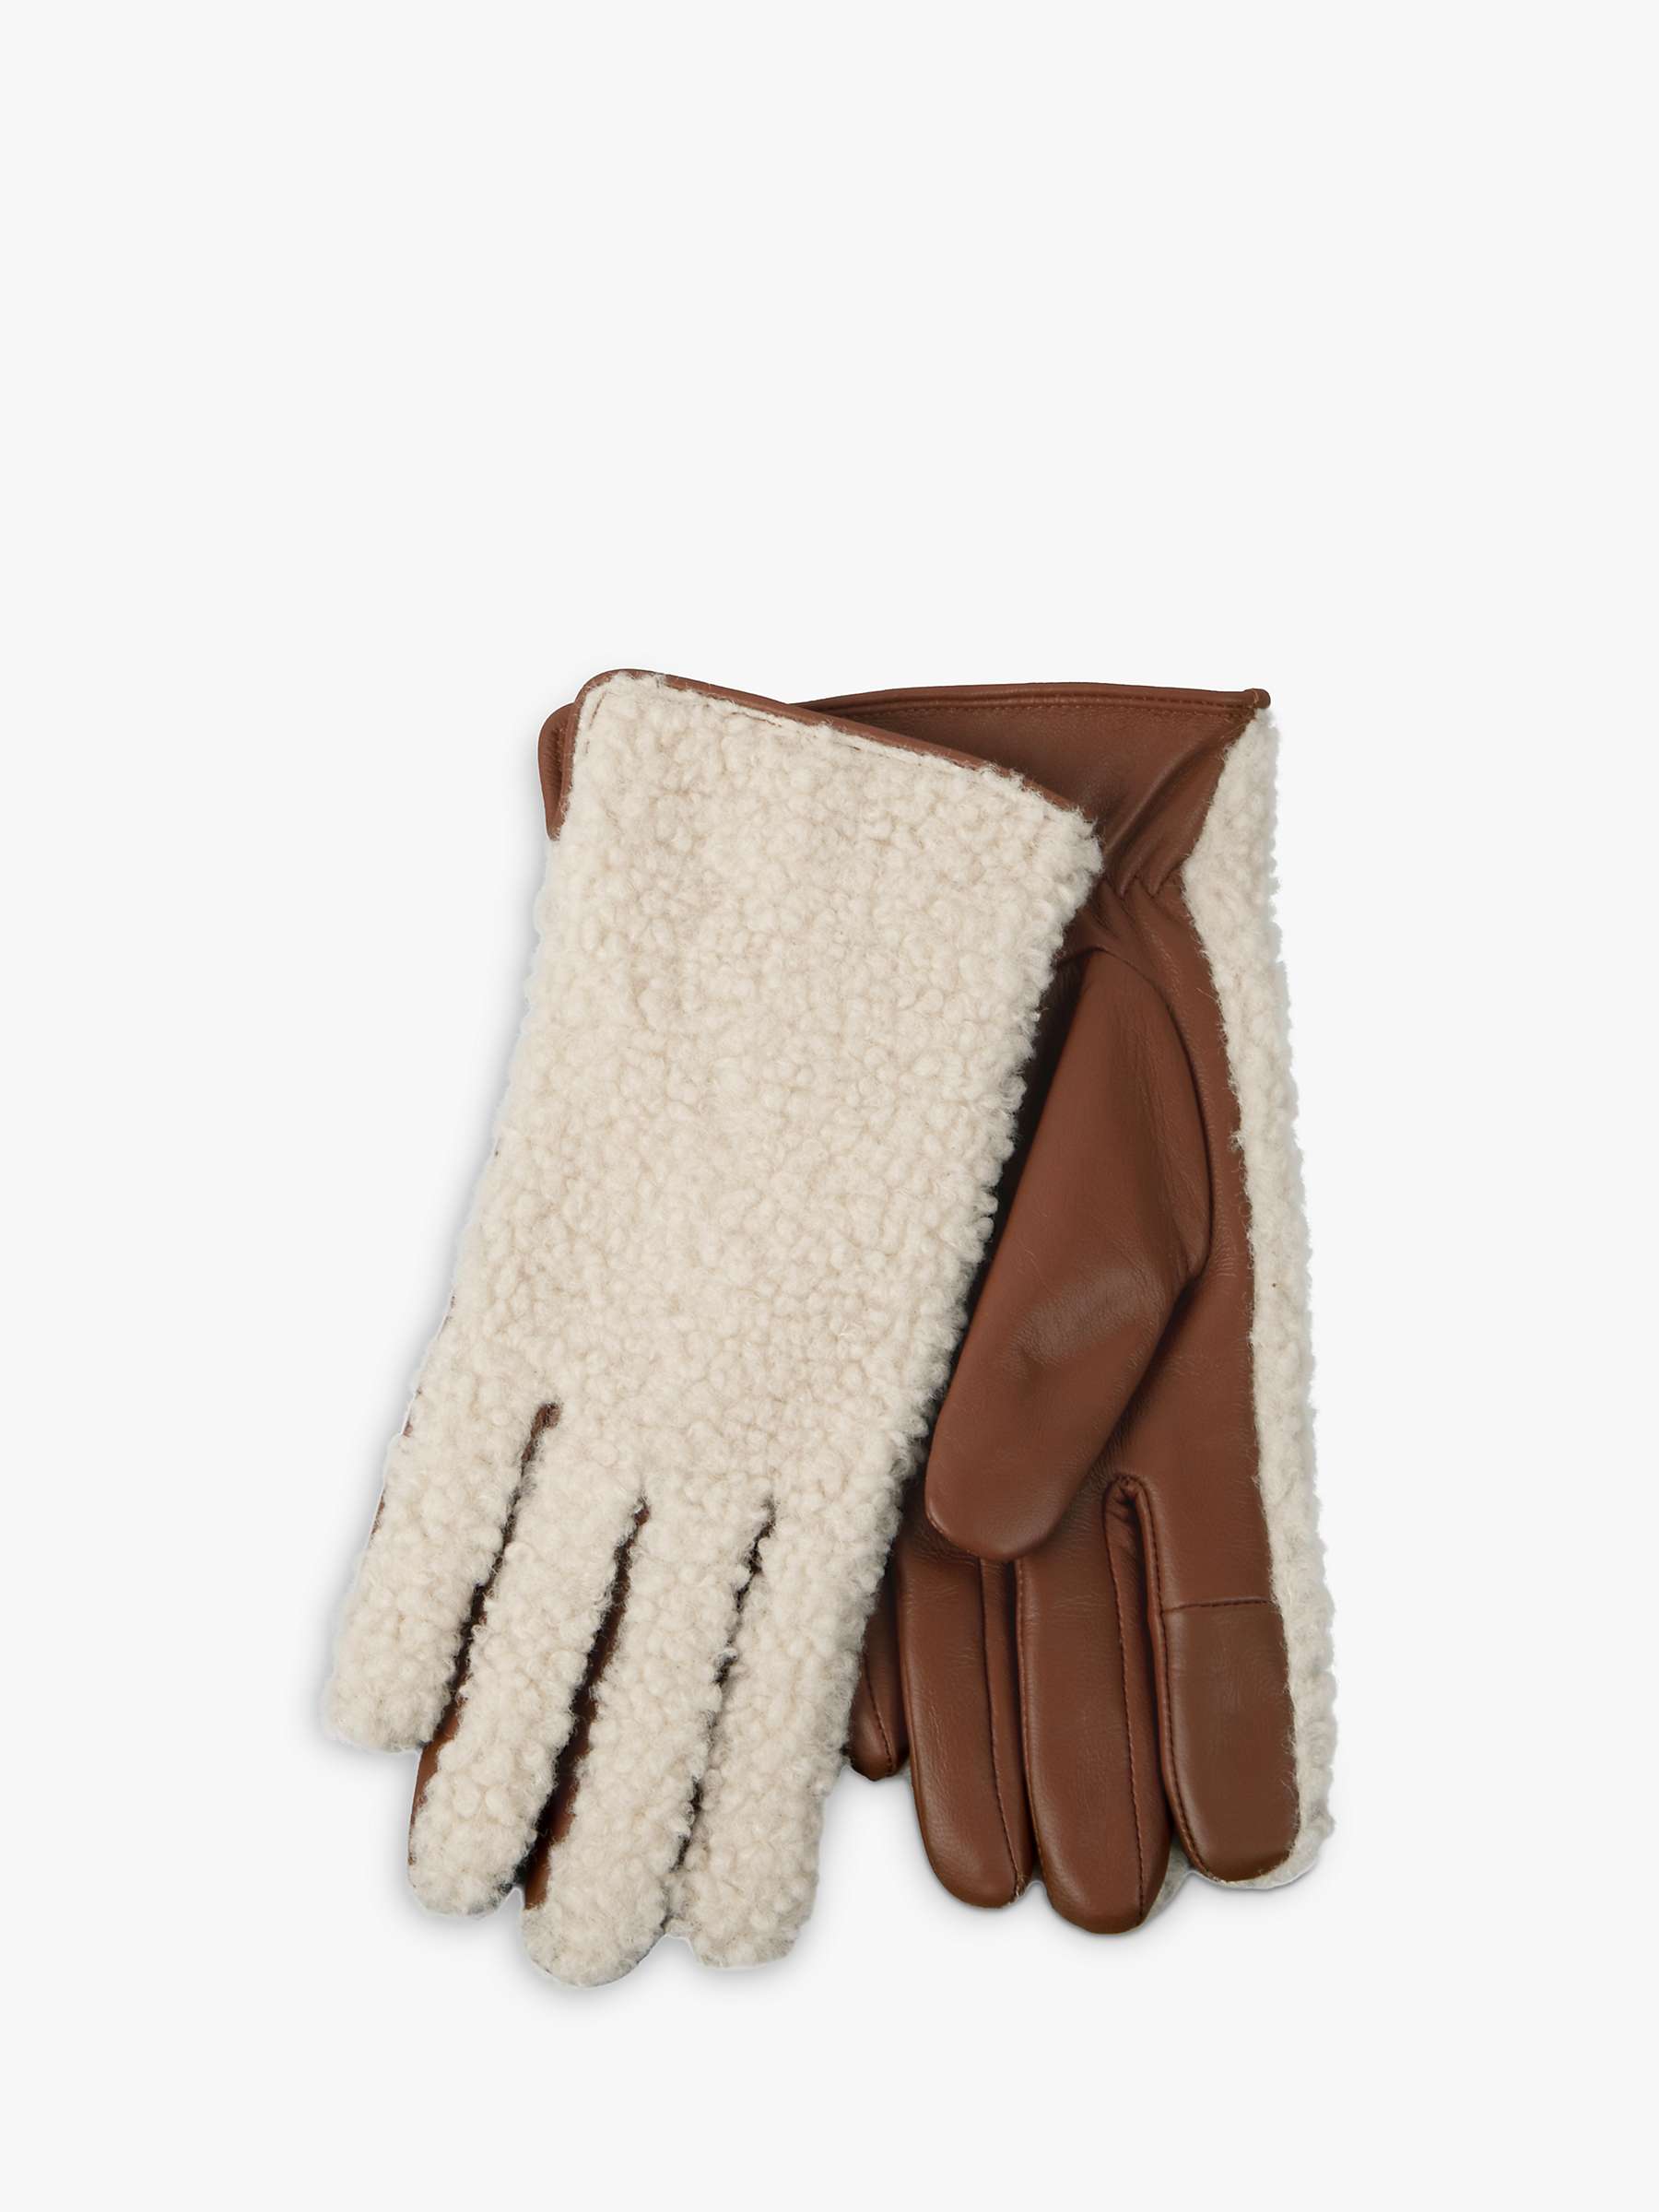 Buy totes Leather and Borg Gloves, Cream/Tan Online at johnlewis.com